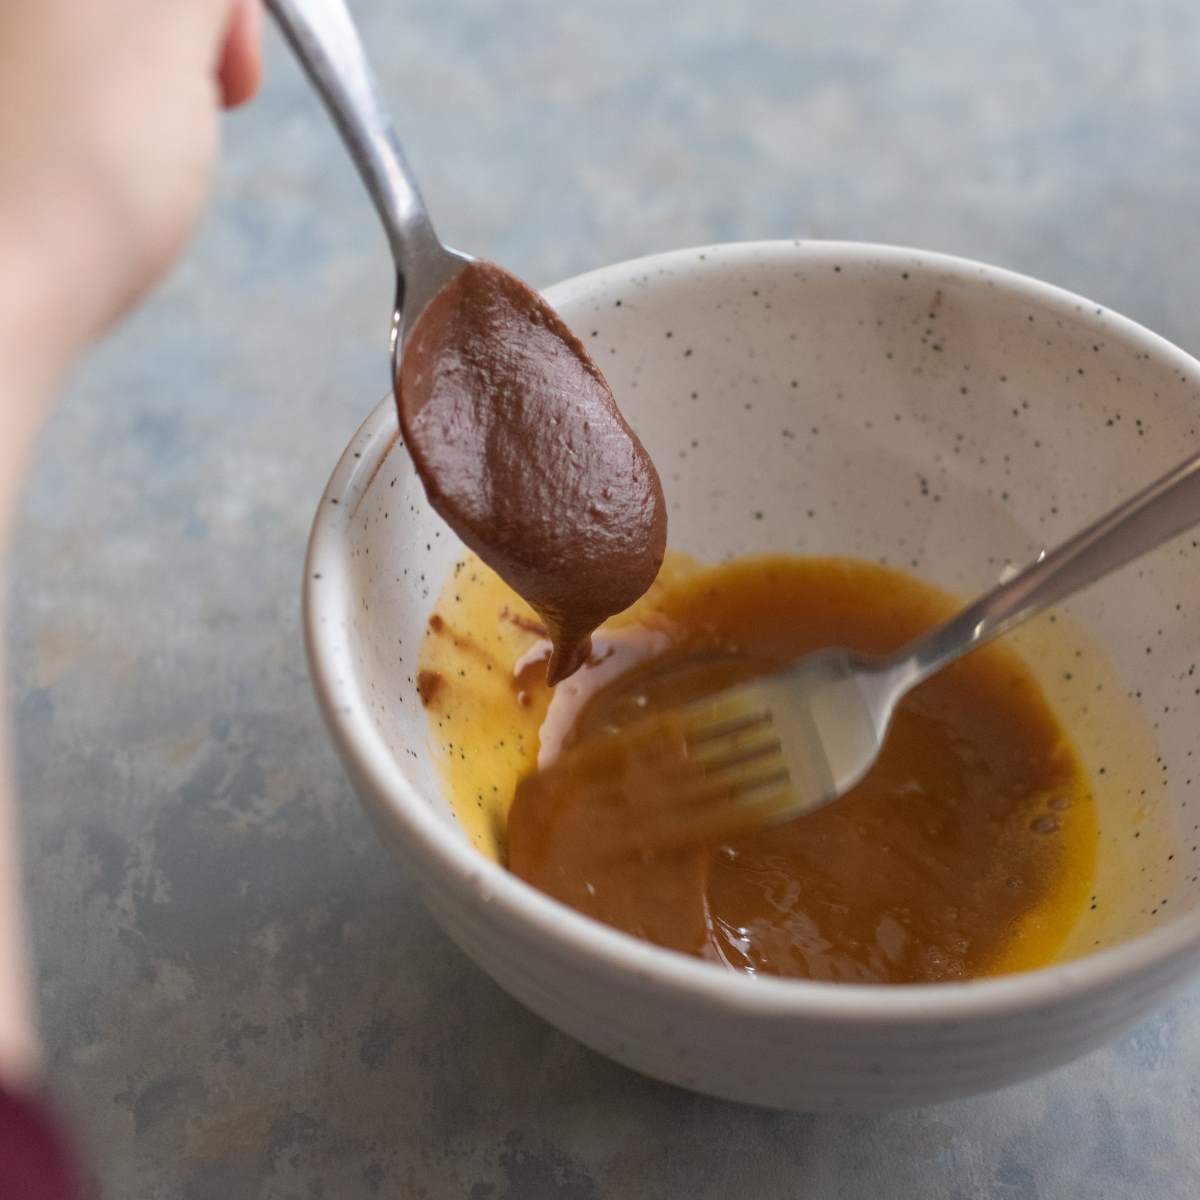 Slowly adding chocolate mixture into a mixing bowl of whisked egg yolks with a spoon.